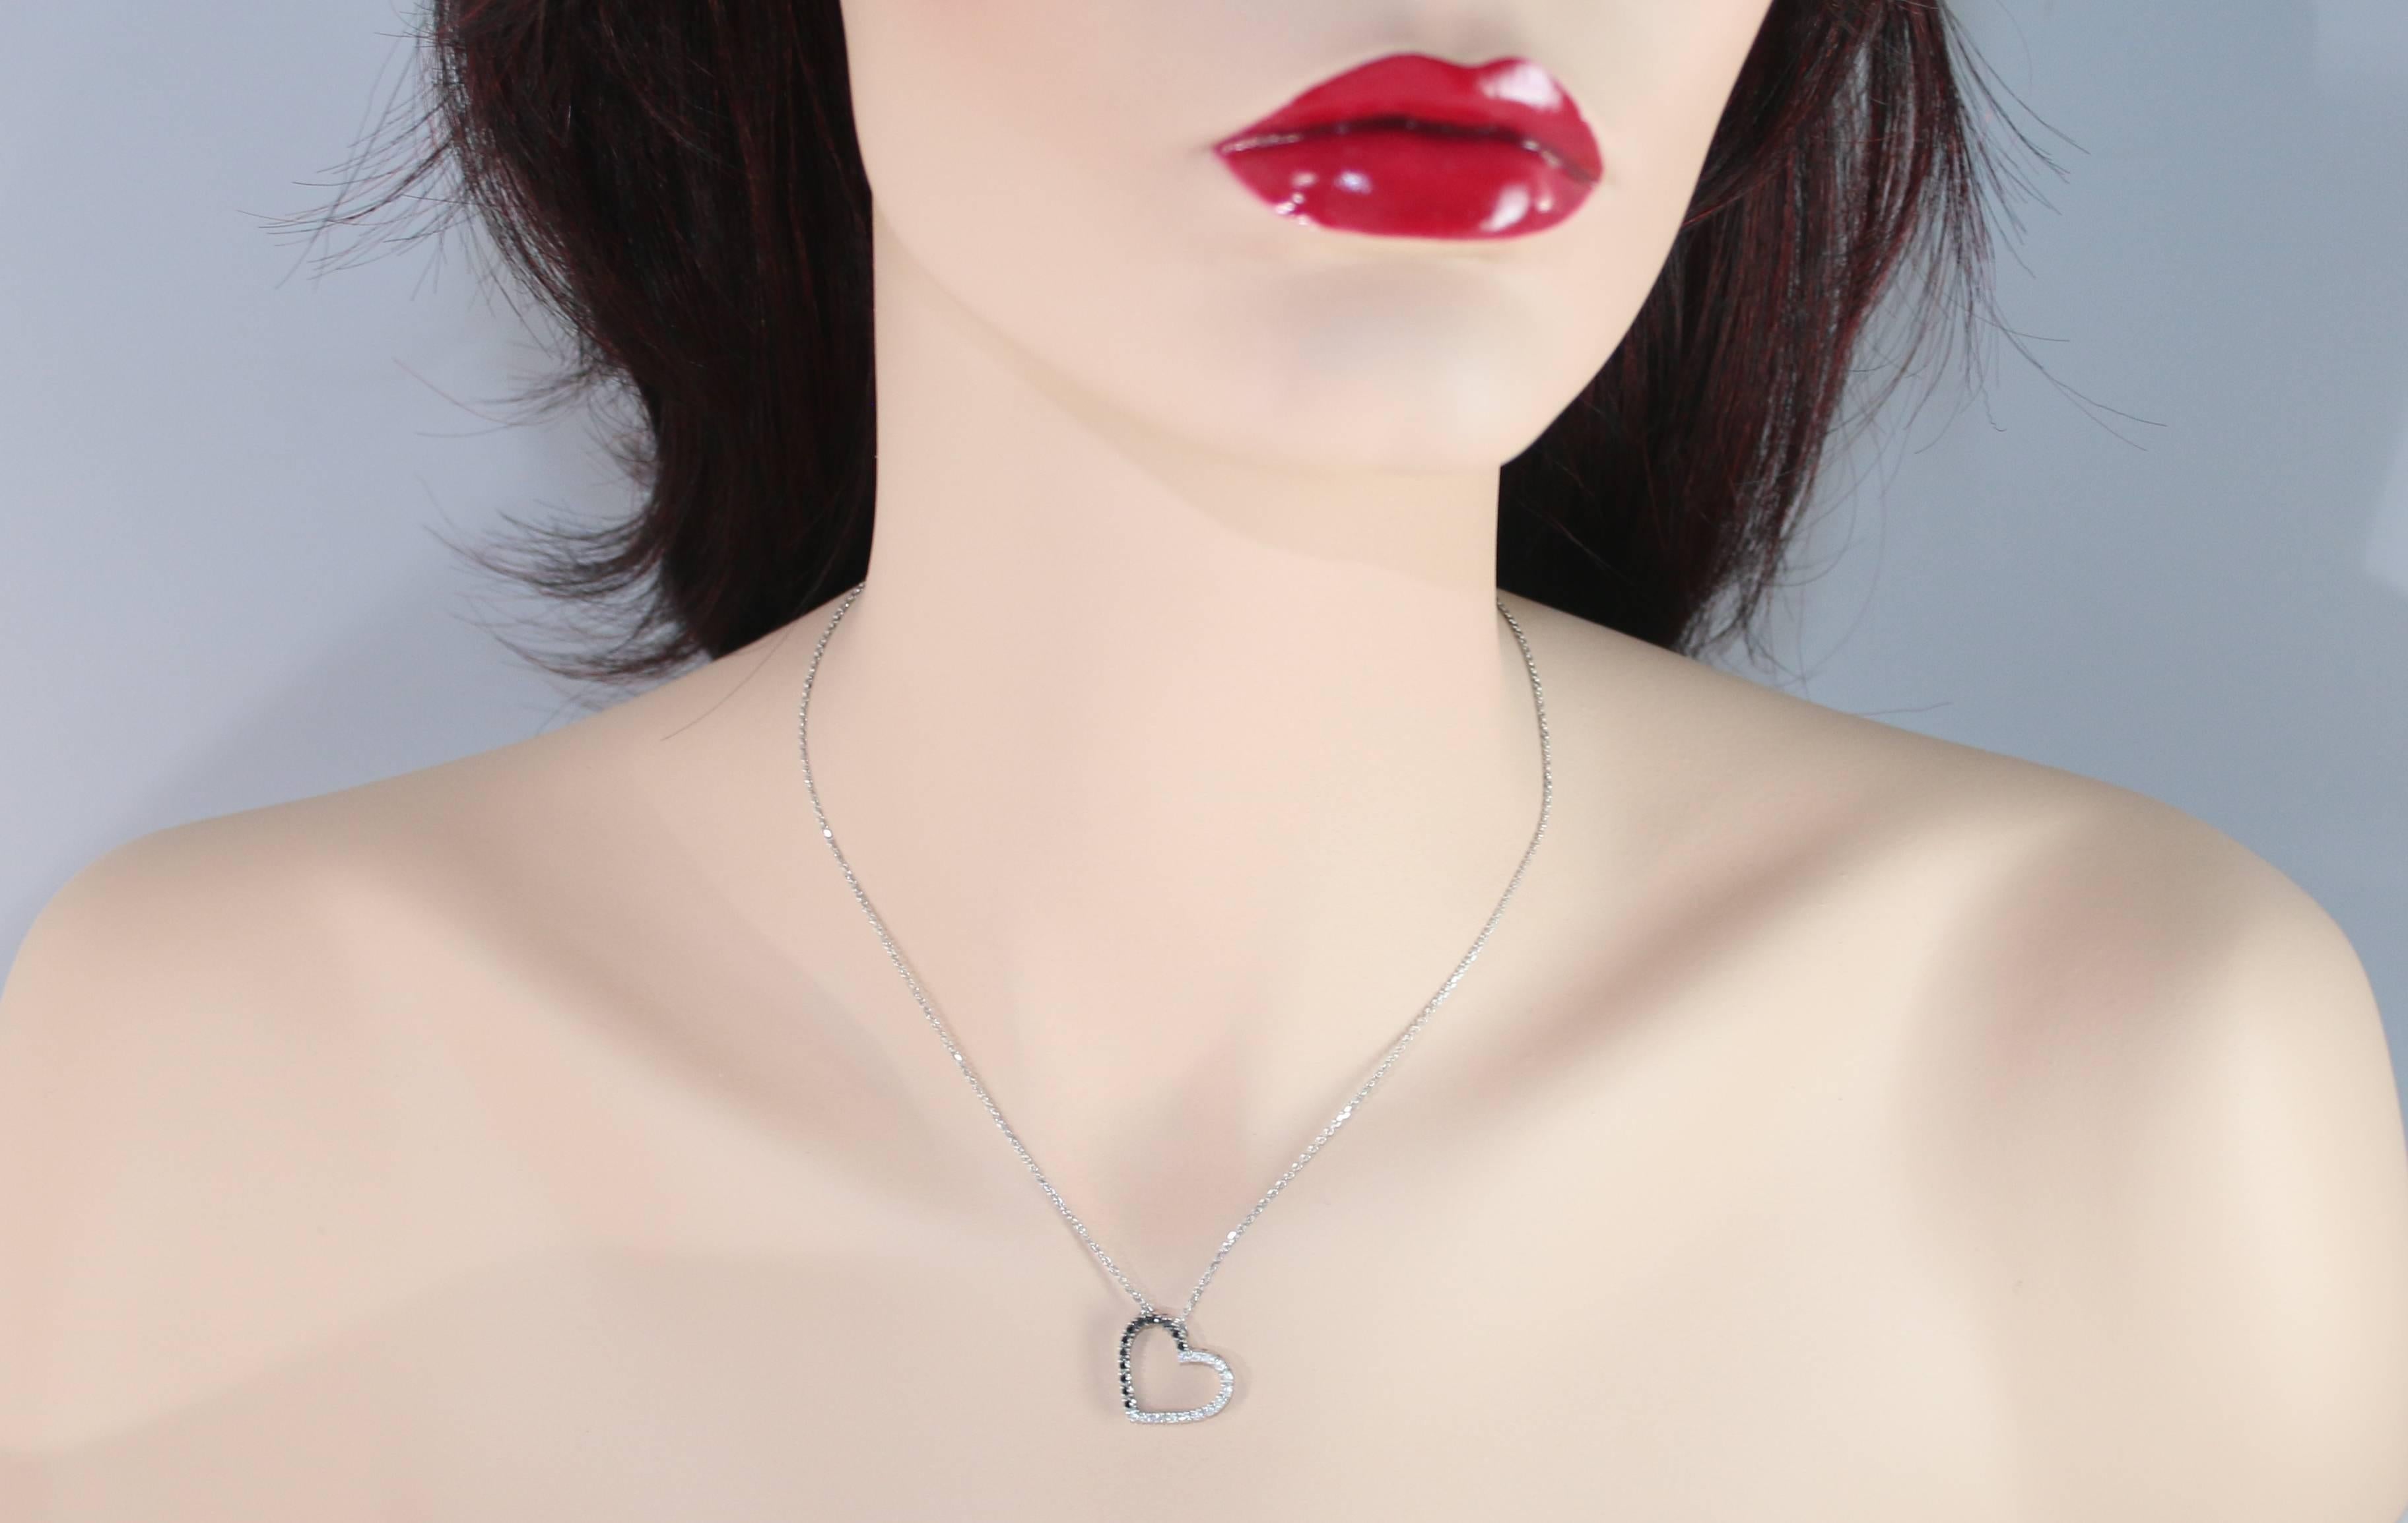 Very Delicate Heart Necklace.
The chain and pendant are both 14K White Gold.
There are 0.25 Carats in White Diamonds G/H I1.
There are 0.25 Carats in Black Diamonds.
The pendant measures 0.75